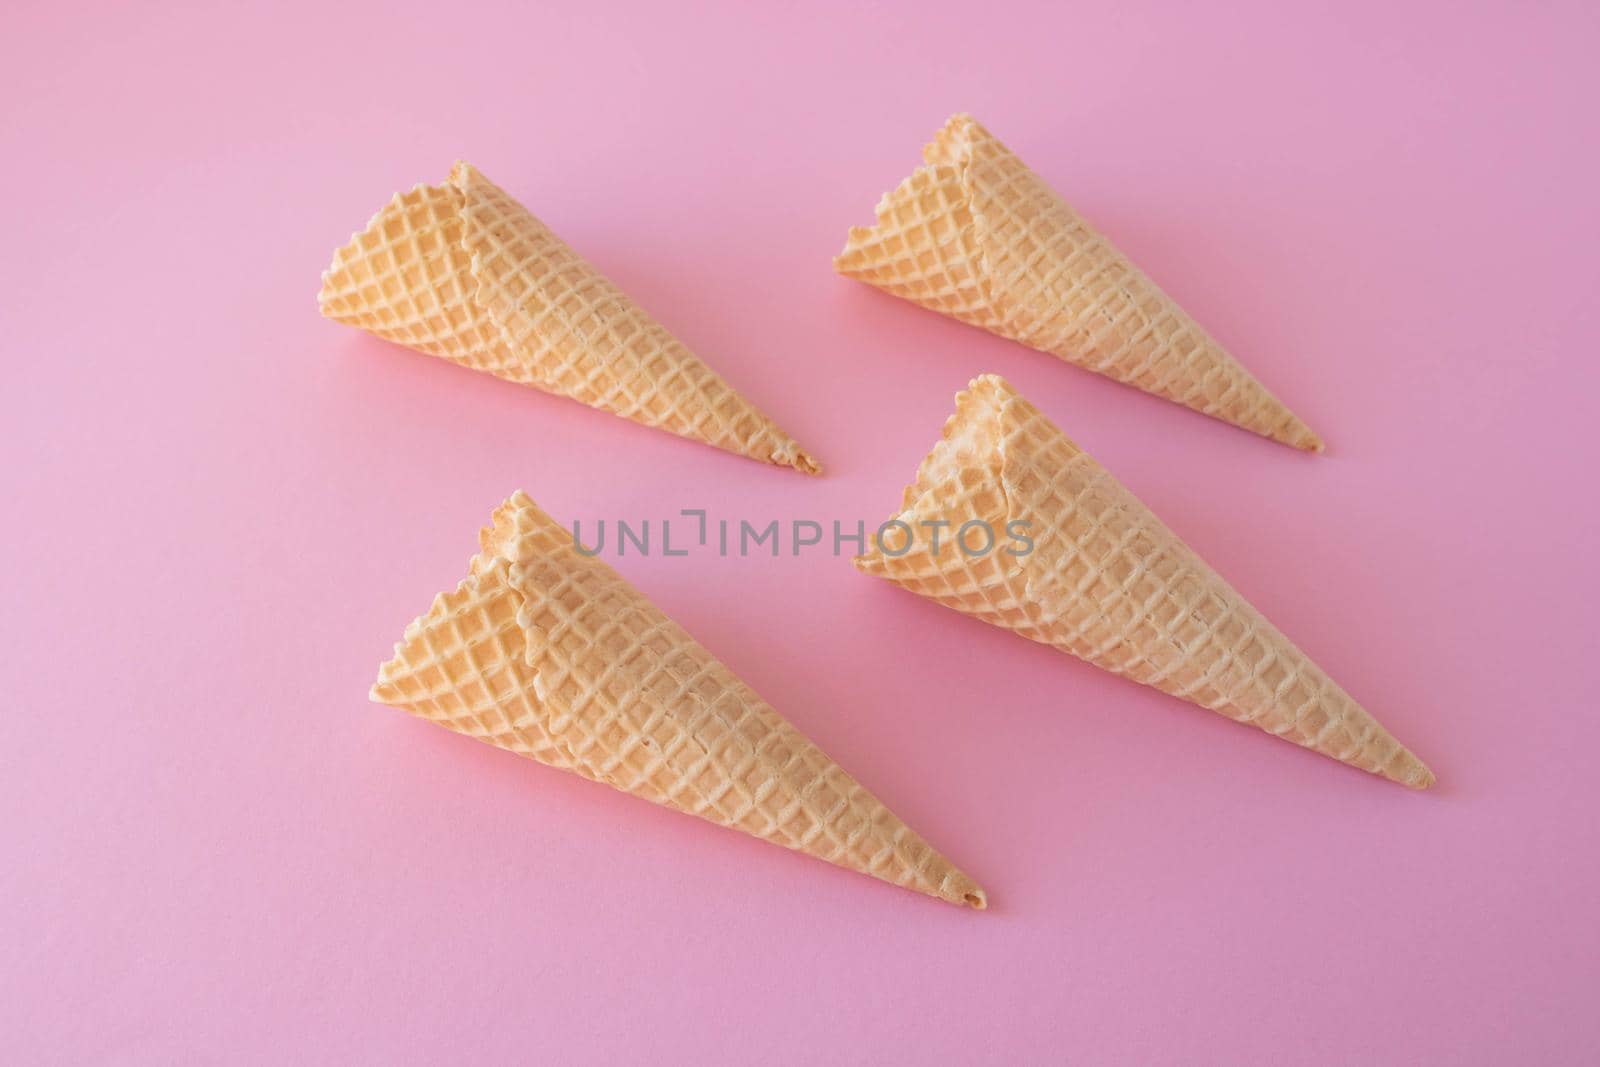 Creative photo of empty waffle cones on a pink background. by lapushka62